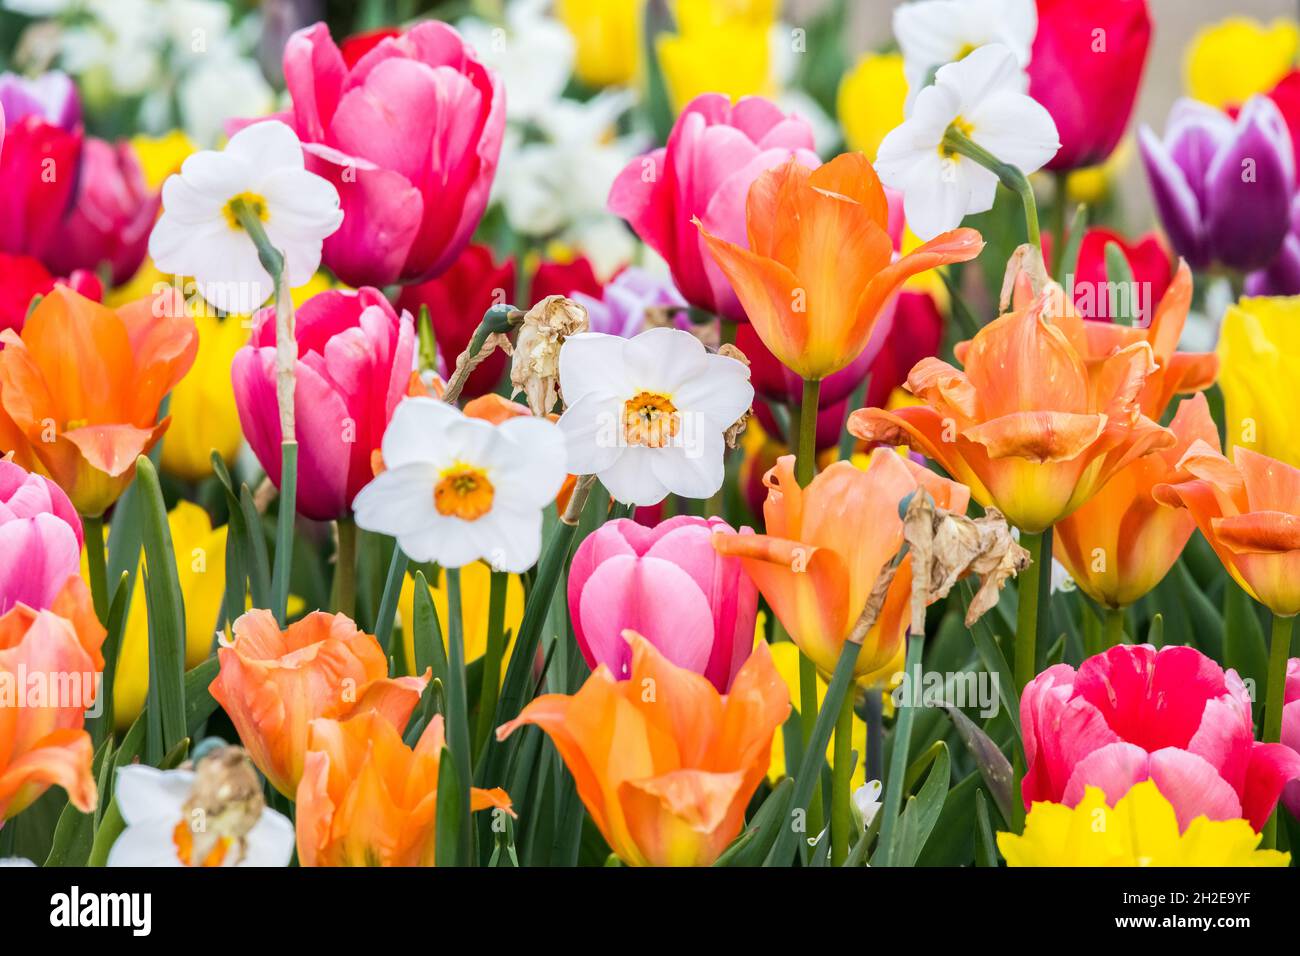 background of many bright vibrant multicolored flowers Stock Photo